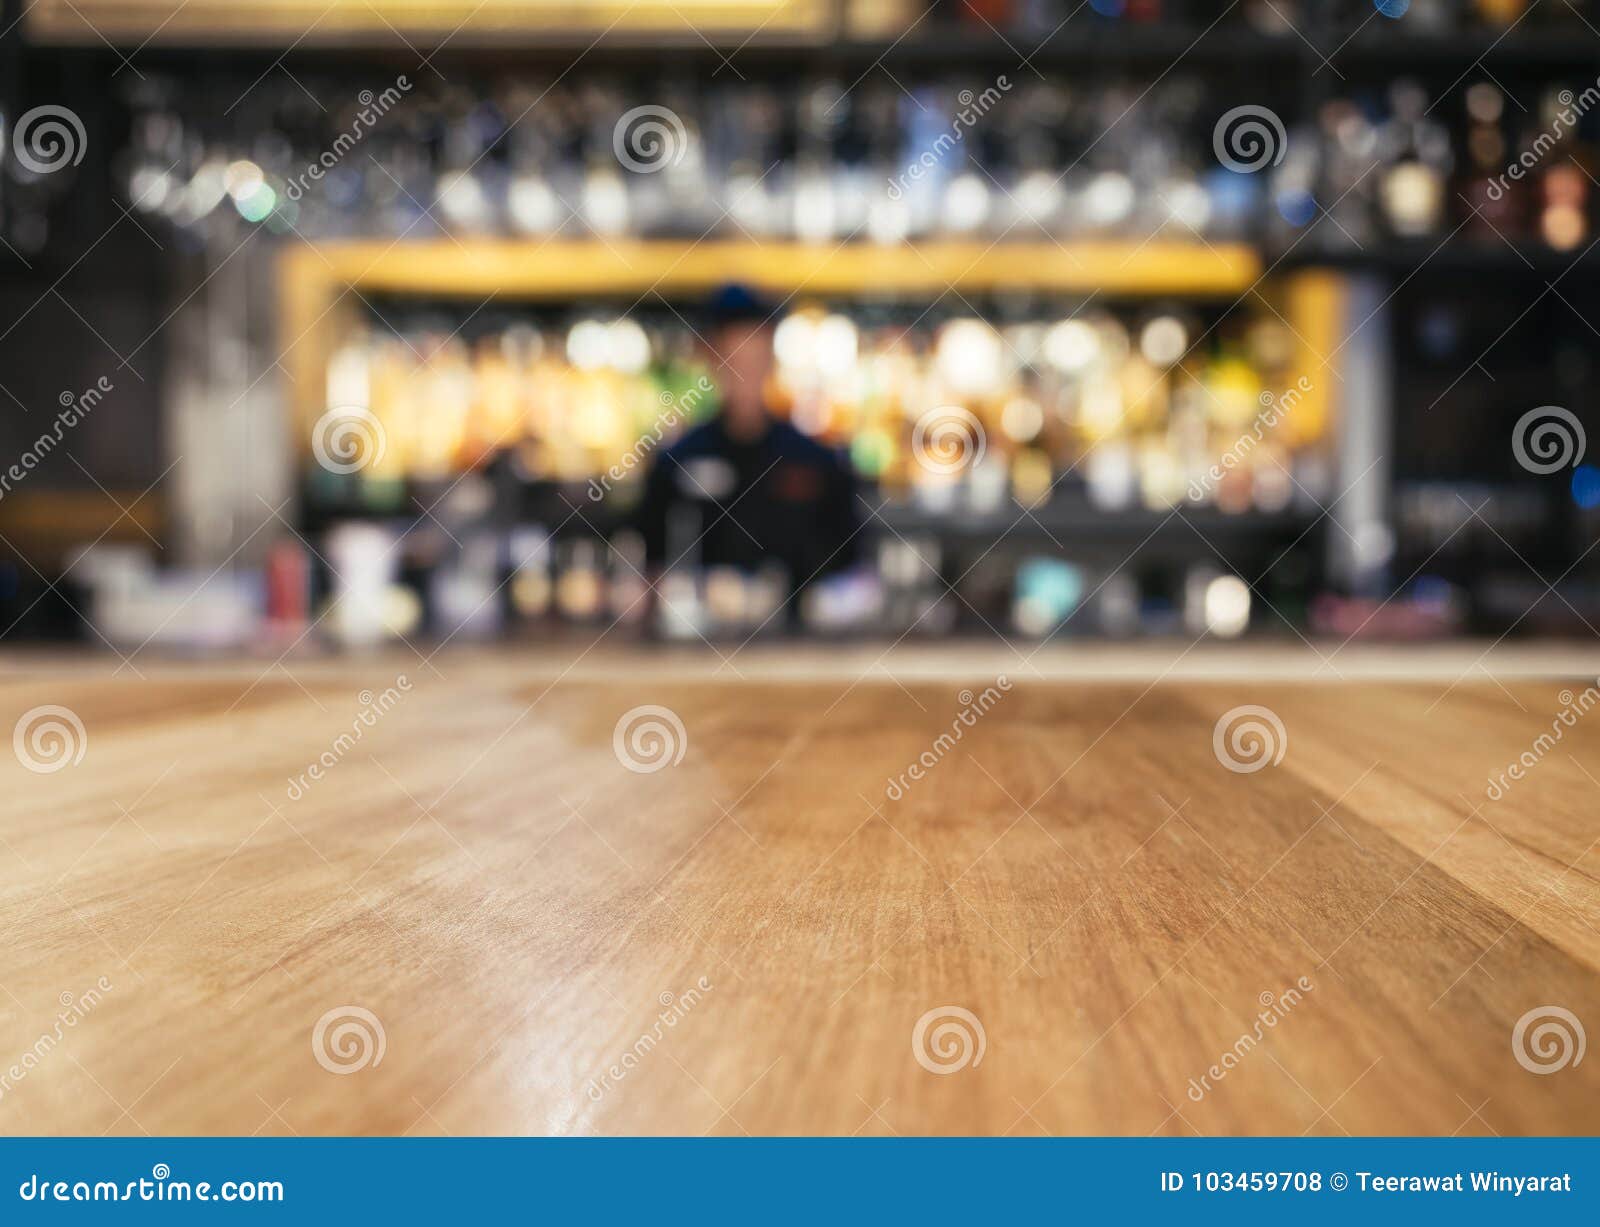 1 420 Bar Top Shelf Photos Free Royalty Free Stock Photos From Dreamstime